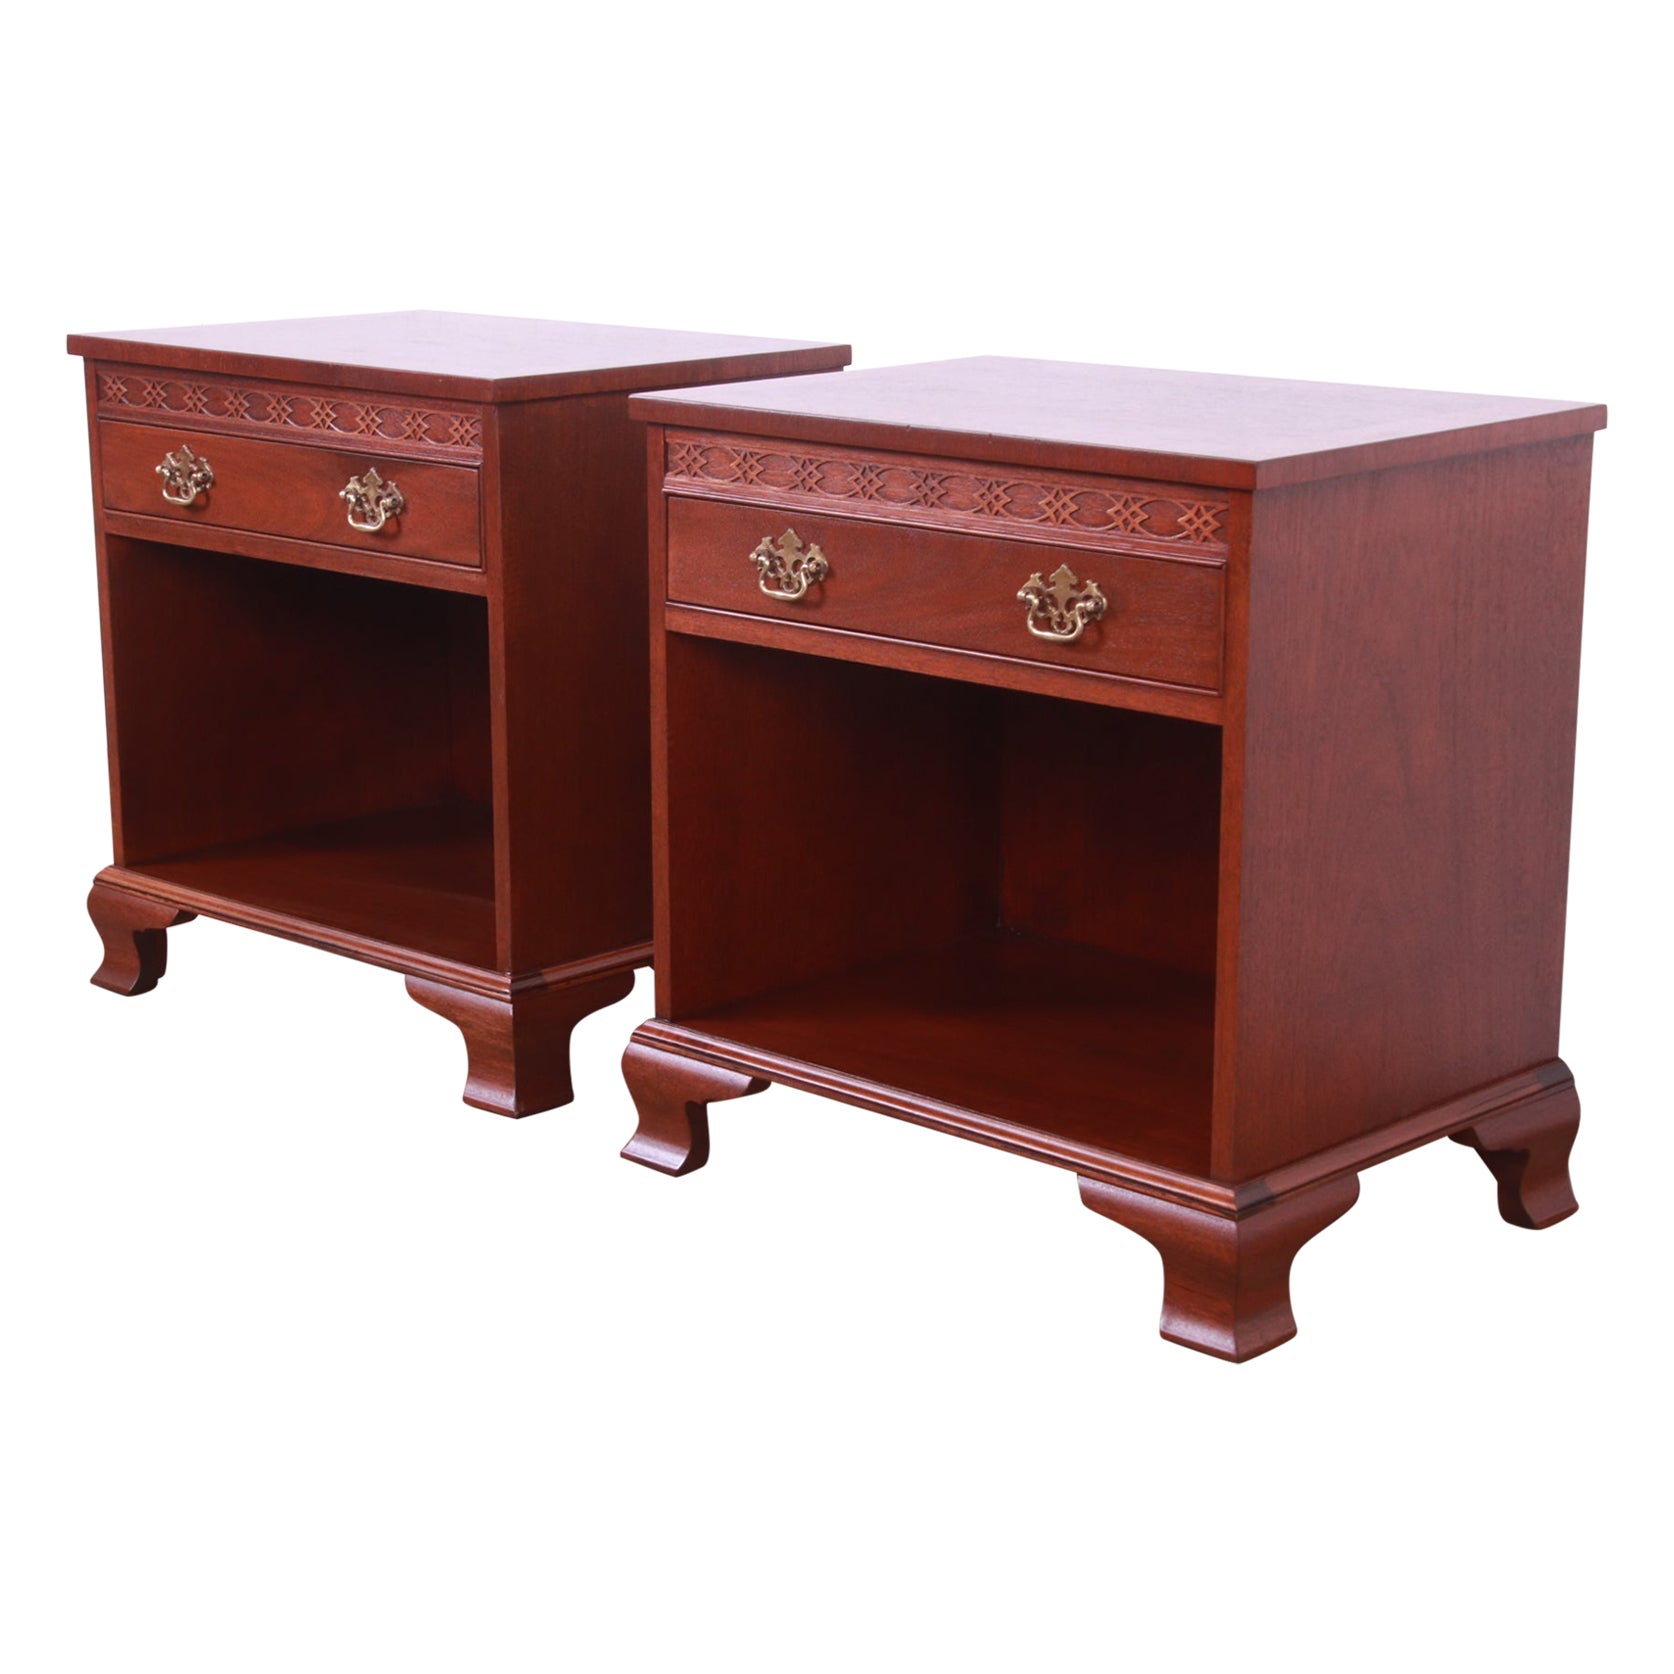 Baker Furniture Georgian Carved Mahogany Nightstands, Newly Refinished